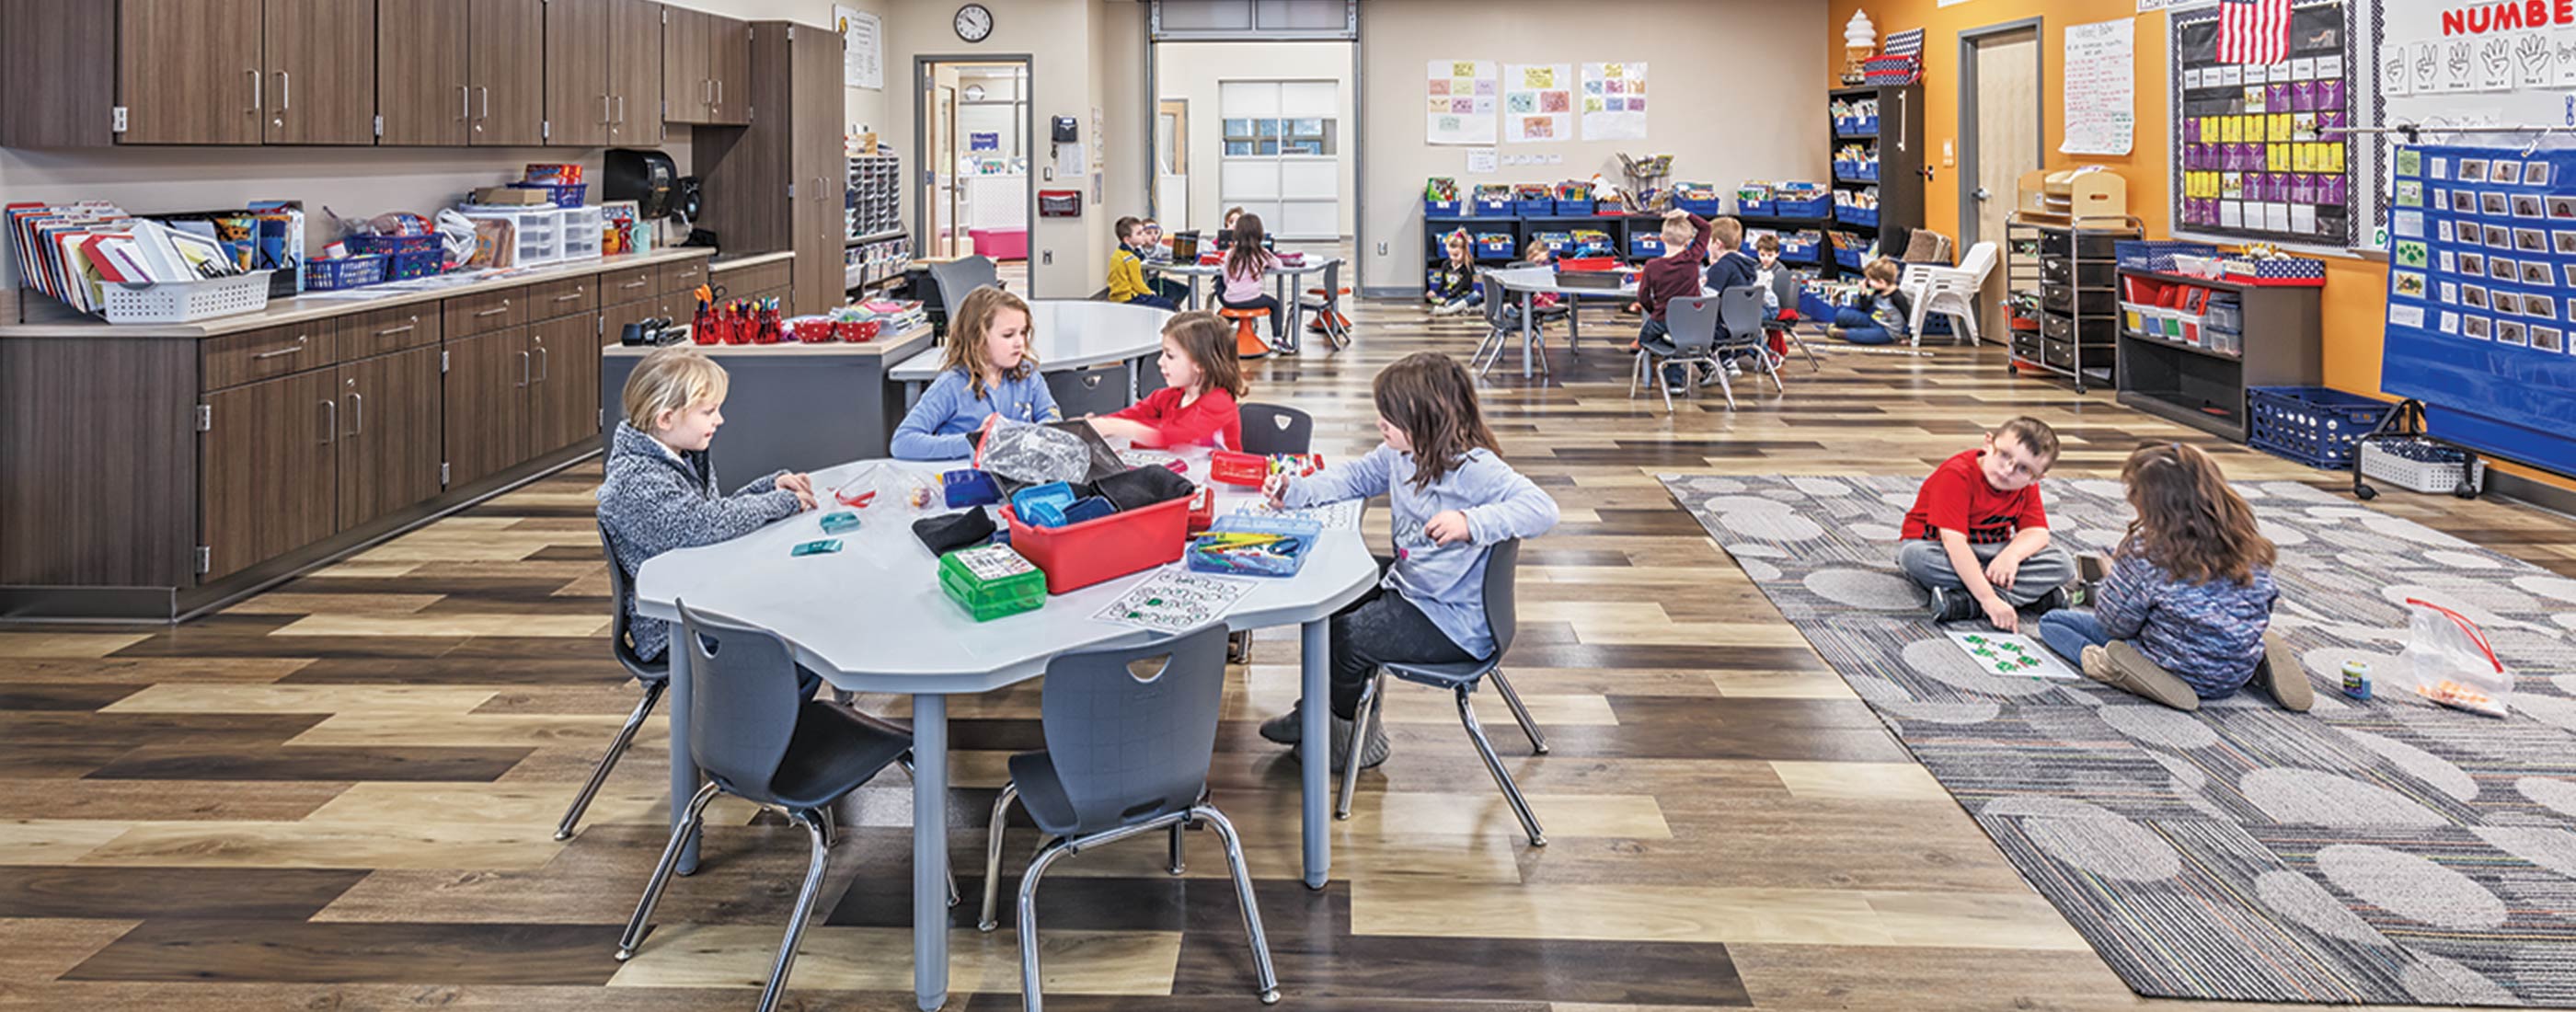 Designed with site circulation in mind, students learn comfortably at Buckeye Valley East Elementary.